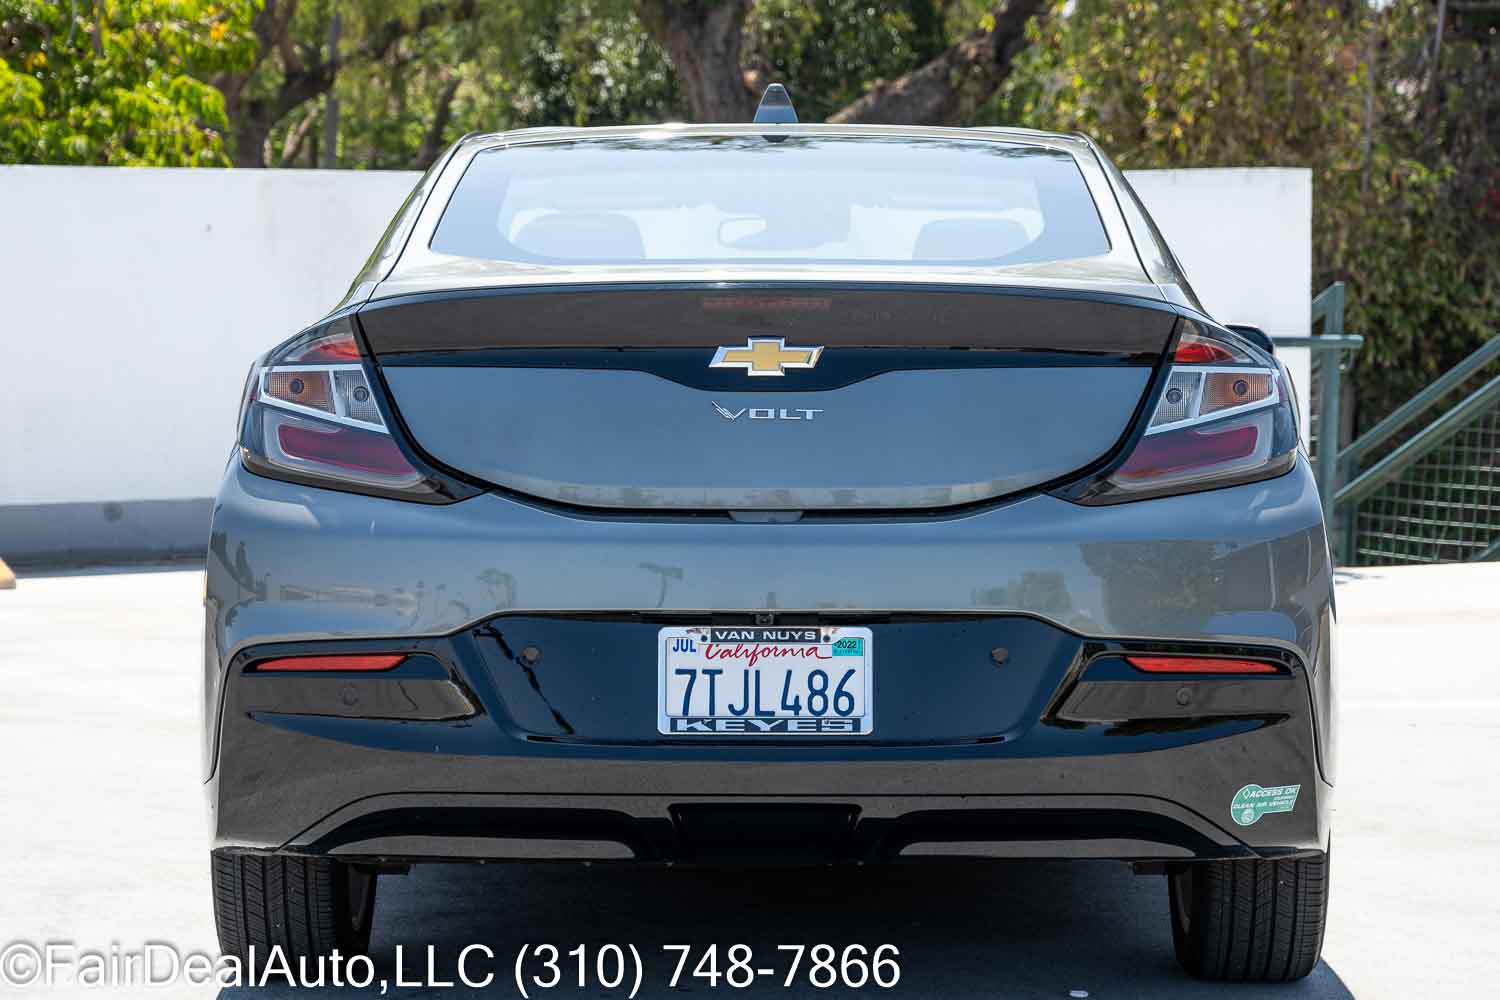 short-term-lease-on-a-chevy-volt-lease-a-chevy-volt-in-los-angeles